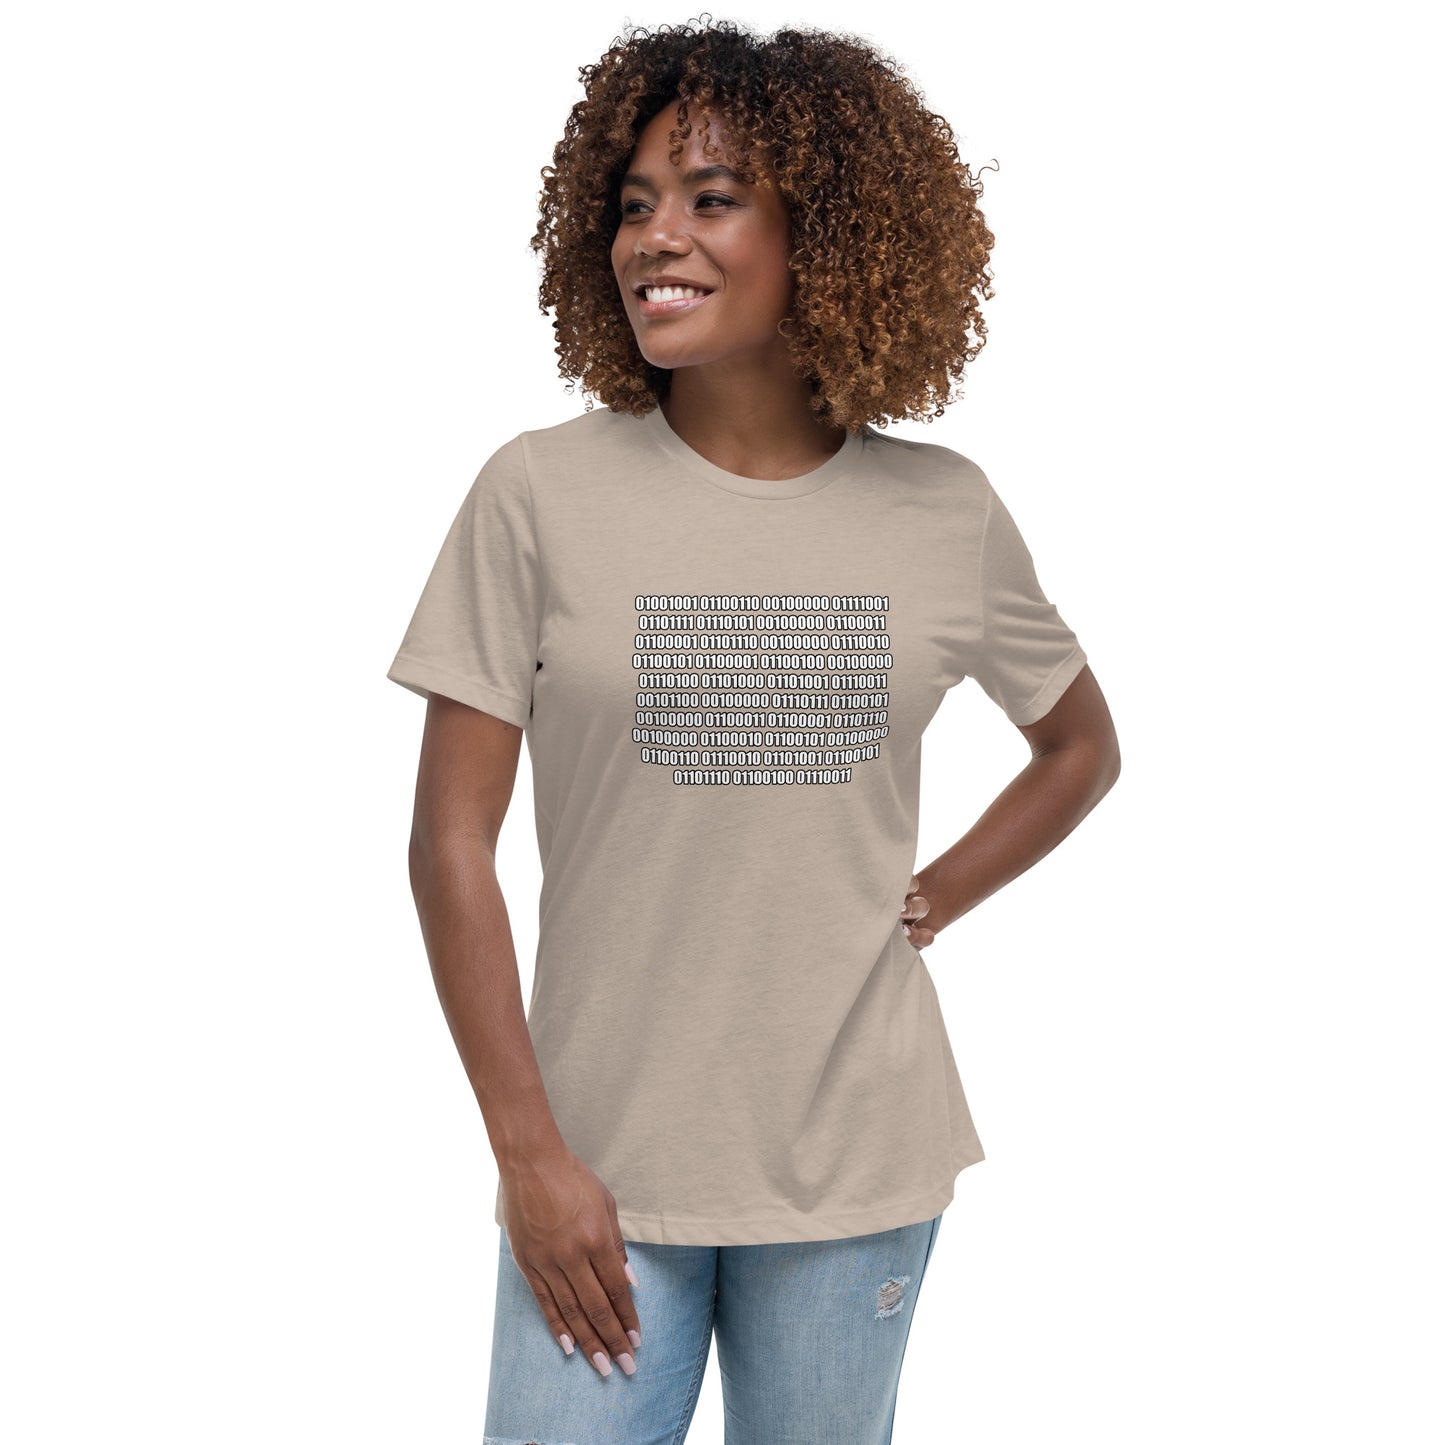 Woman with stone t-shirt with binary code "If you can read this"